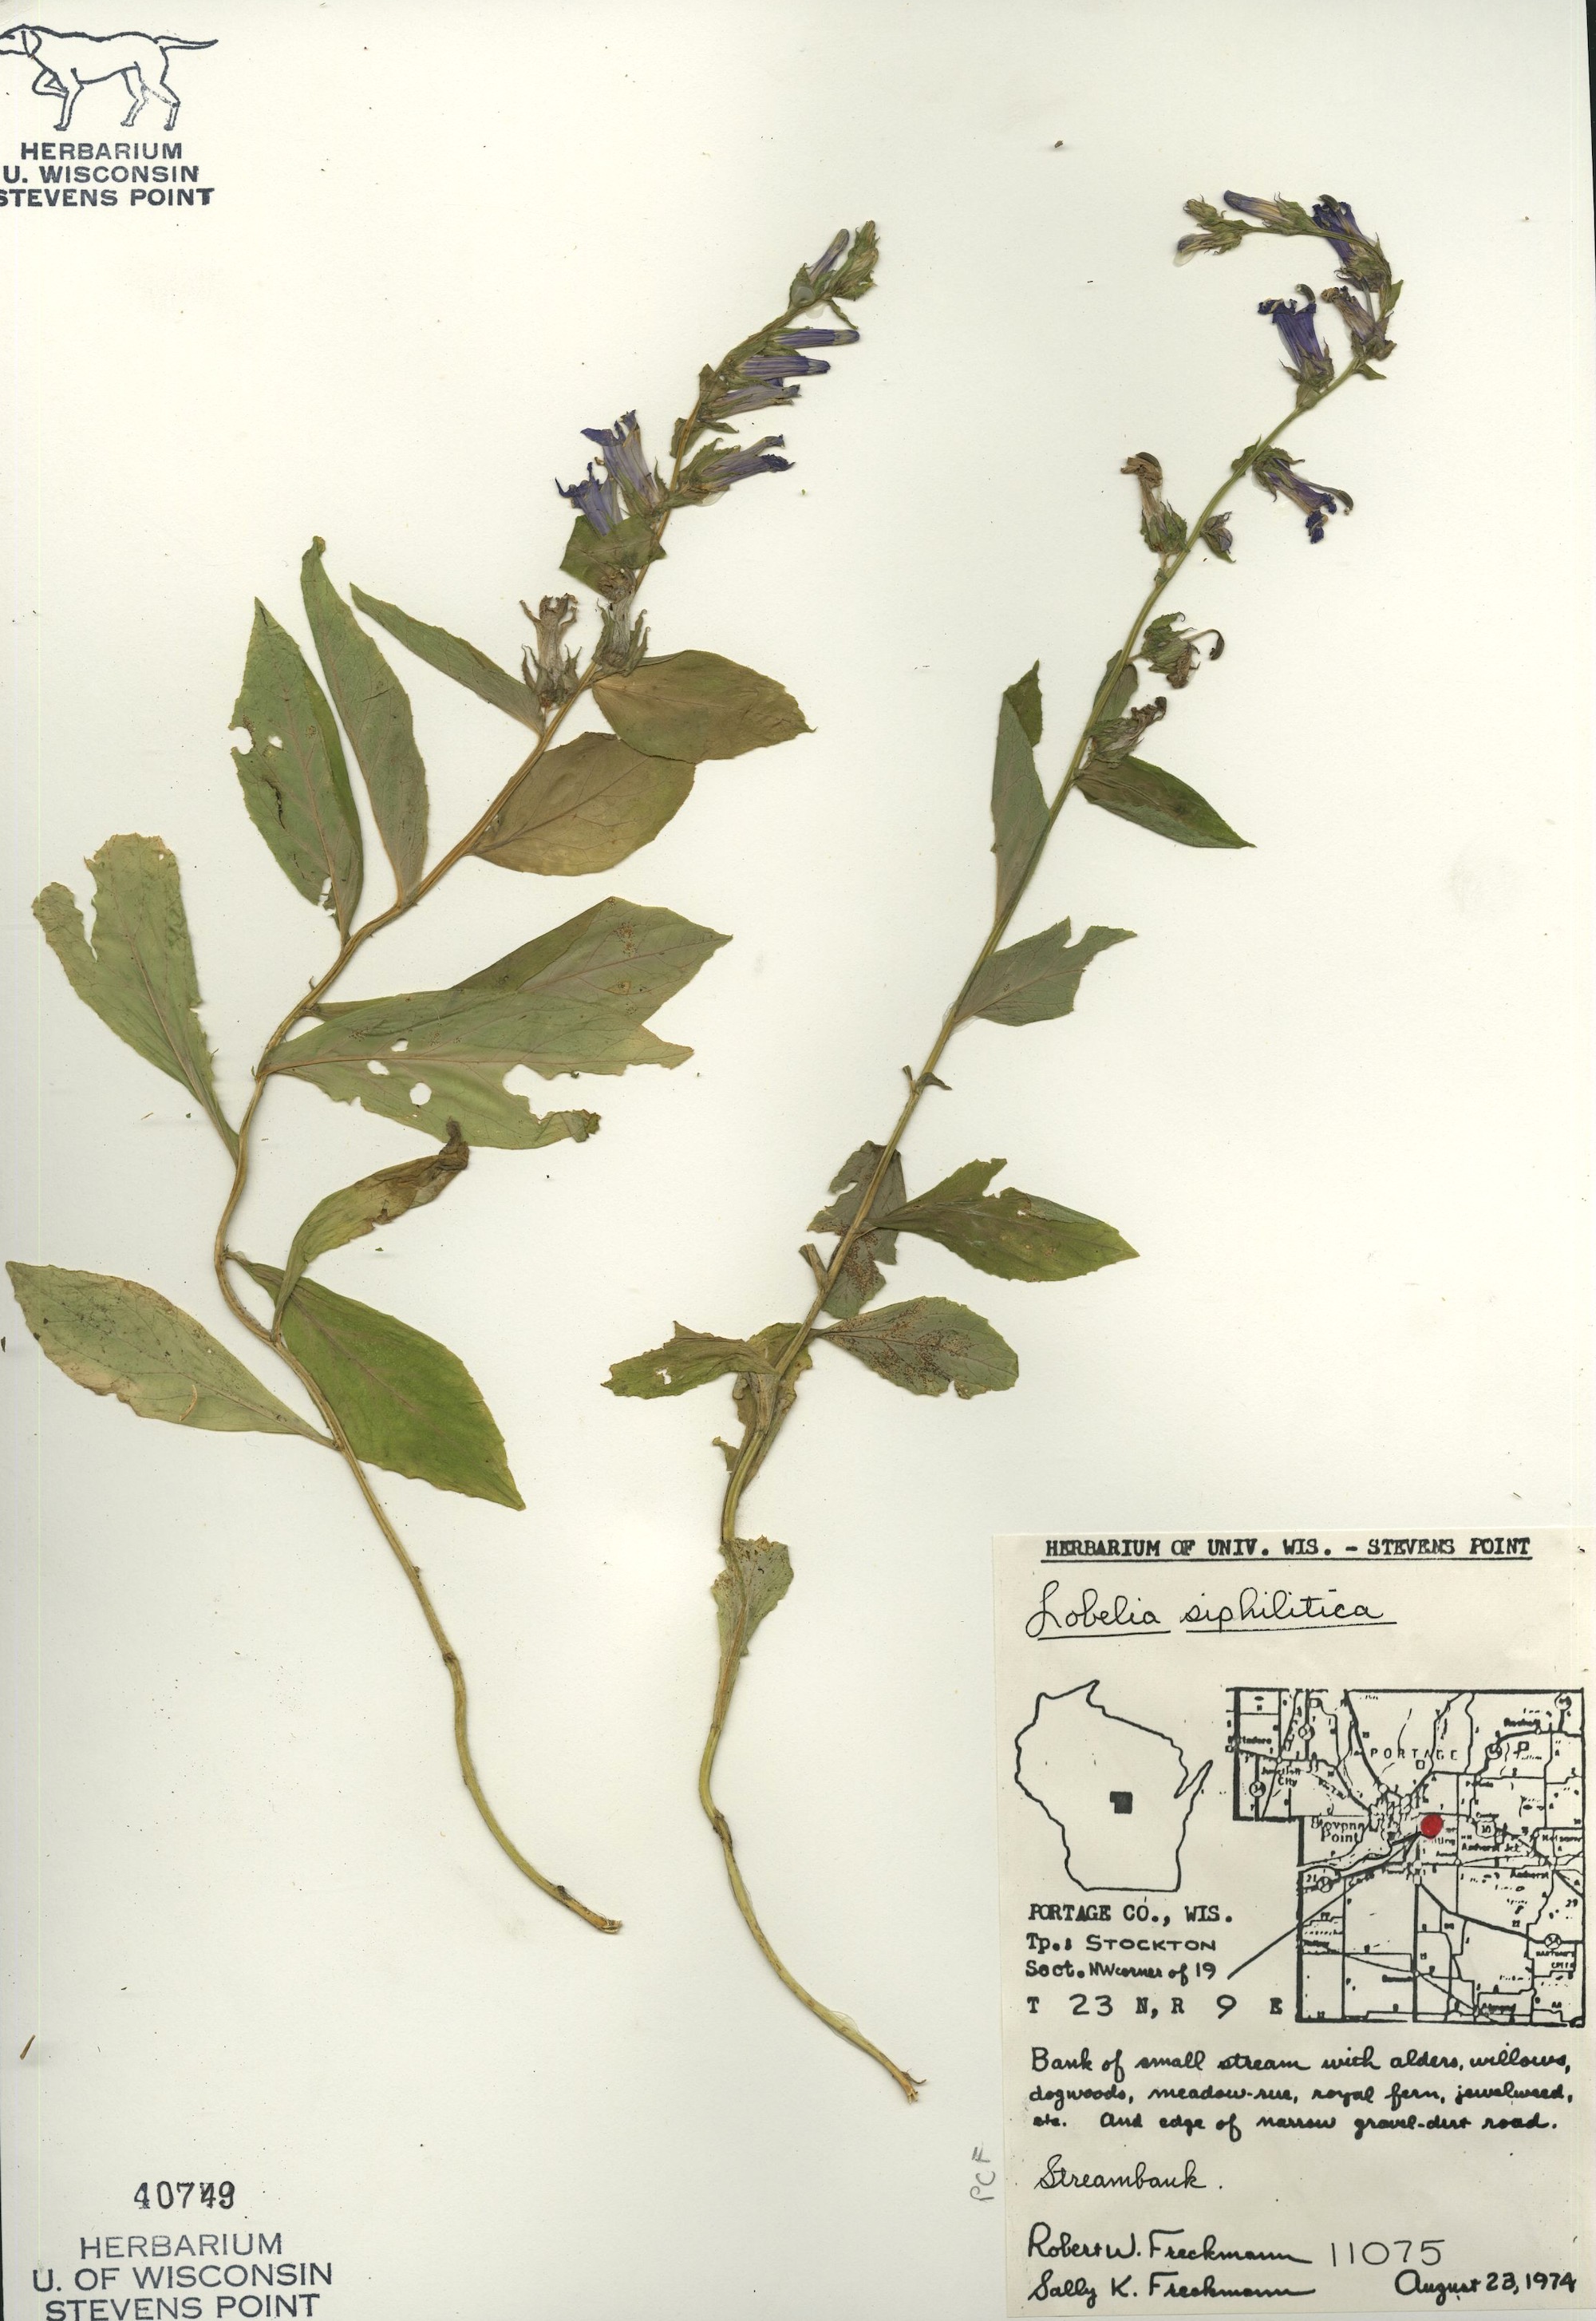 Blue Lobelia specimen collected in Portage County, Wisconsin on the bank of a small stream on August 23, 1974.